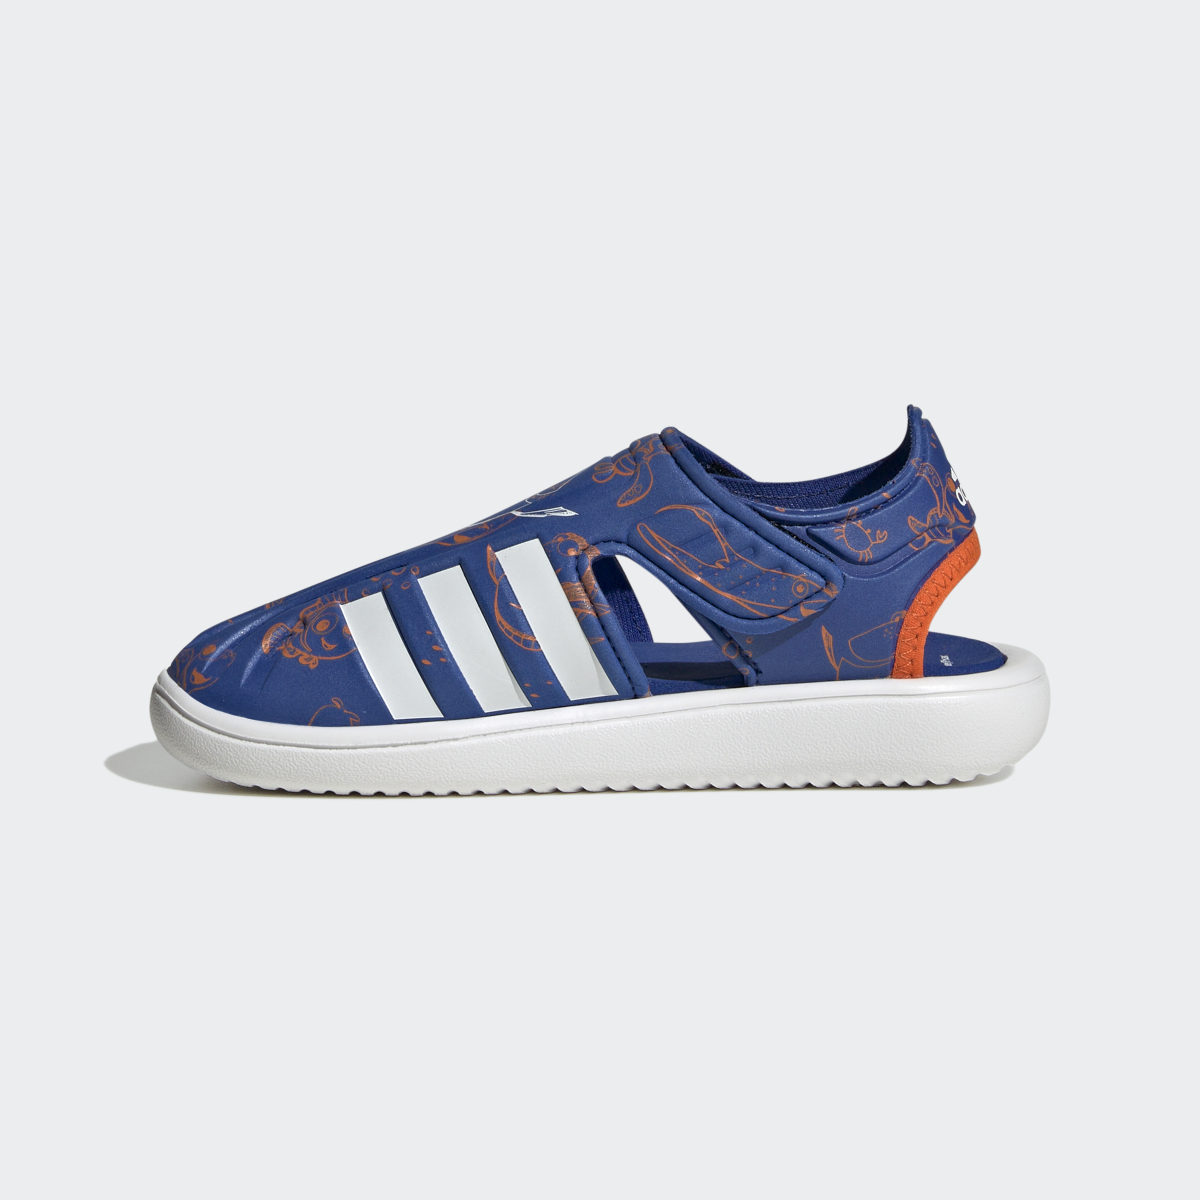 Adidas Finding Nemo and Dory Closed Toe Summer Sandalet. 7